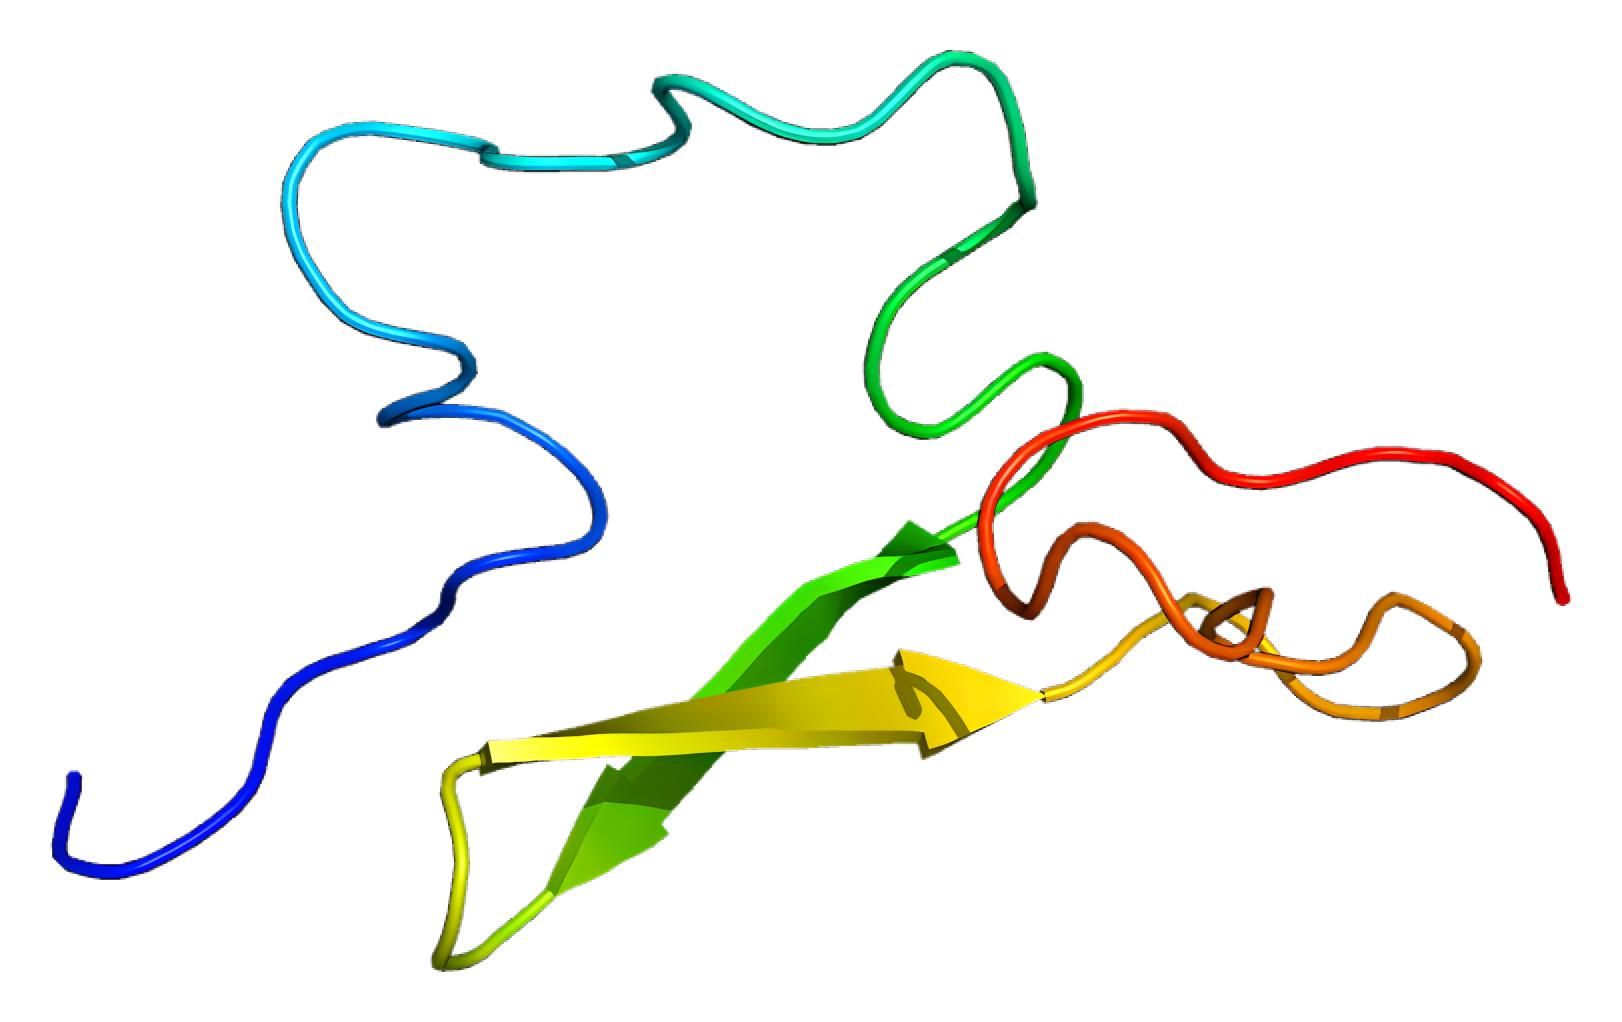 Fig. 1 The 3D model of human C1r. （By Emw - Own work, https://commons.wikimedia.org/wiki/File:Protein_C1R_PDB_1apq.png)